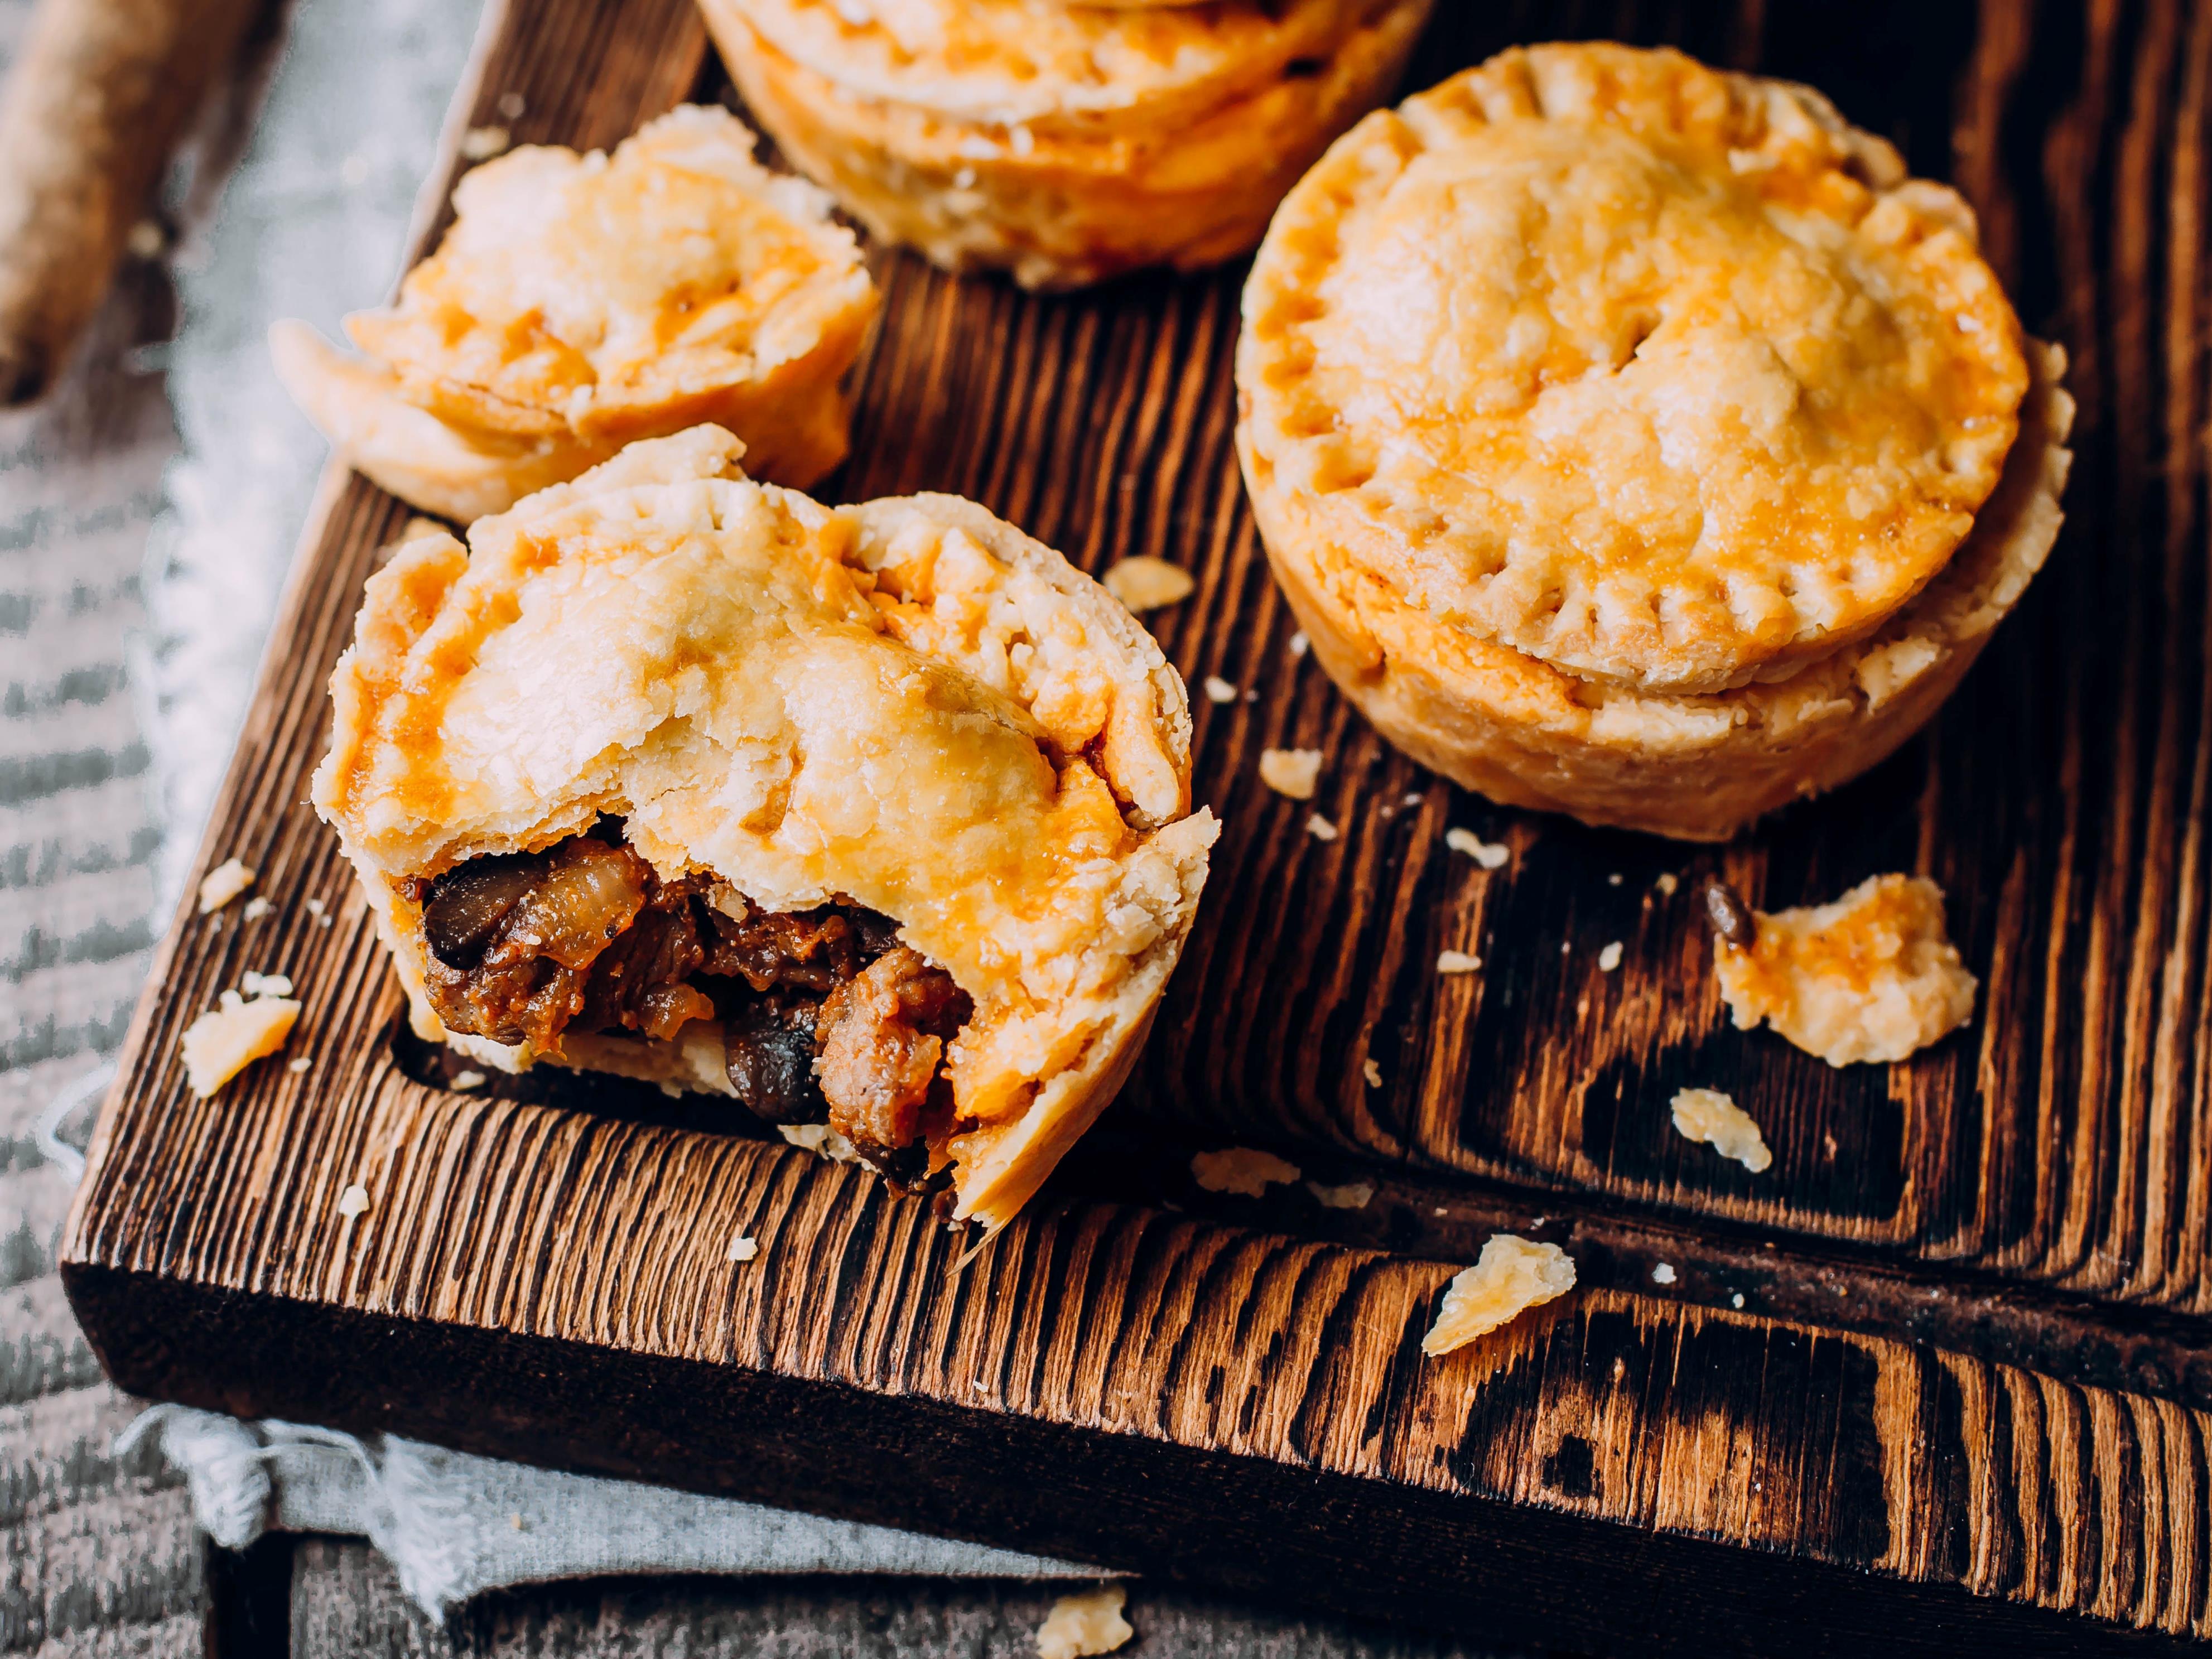 <p><a href="https://www.theguardian.com/lifeandstyle/australia-food-blog/2014/may/07/meat-pie-a-great-australian-dish">According to The Guardian</a>, these hand pies consist of beef and gravy, topped with tomato sauce.</p><p>The dish is so popular in Australia and New Zealand that the two countries' <a href="http://www.foodstandards.gov.au/consumer/generalissues/meatpie/Pages/default.aspx" rel="noopener">Food Standard code</a> states that meat pies must contain a minimum of 25% of meat flesh.</p>